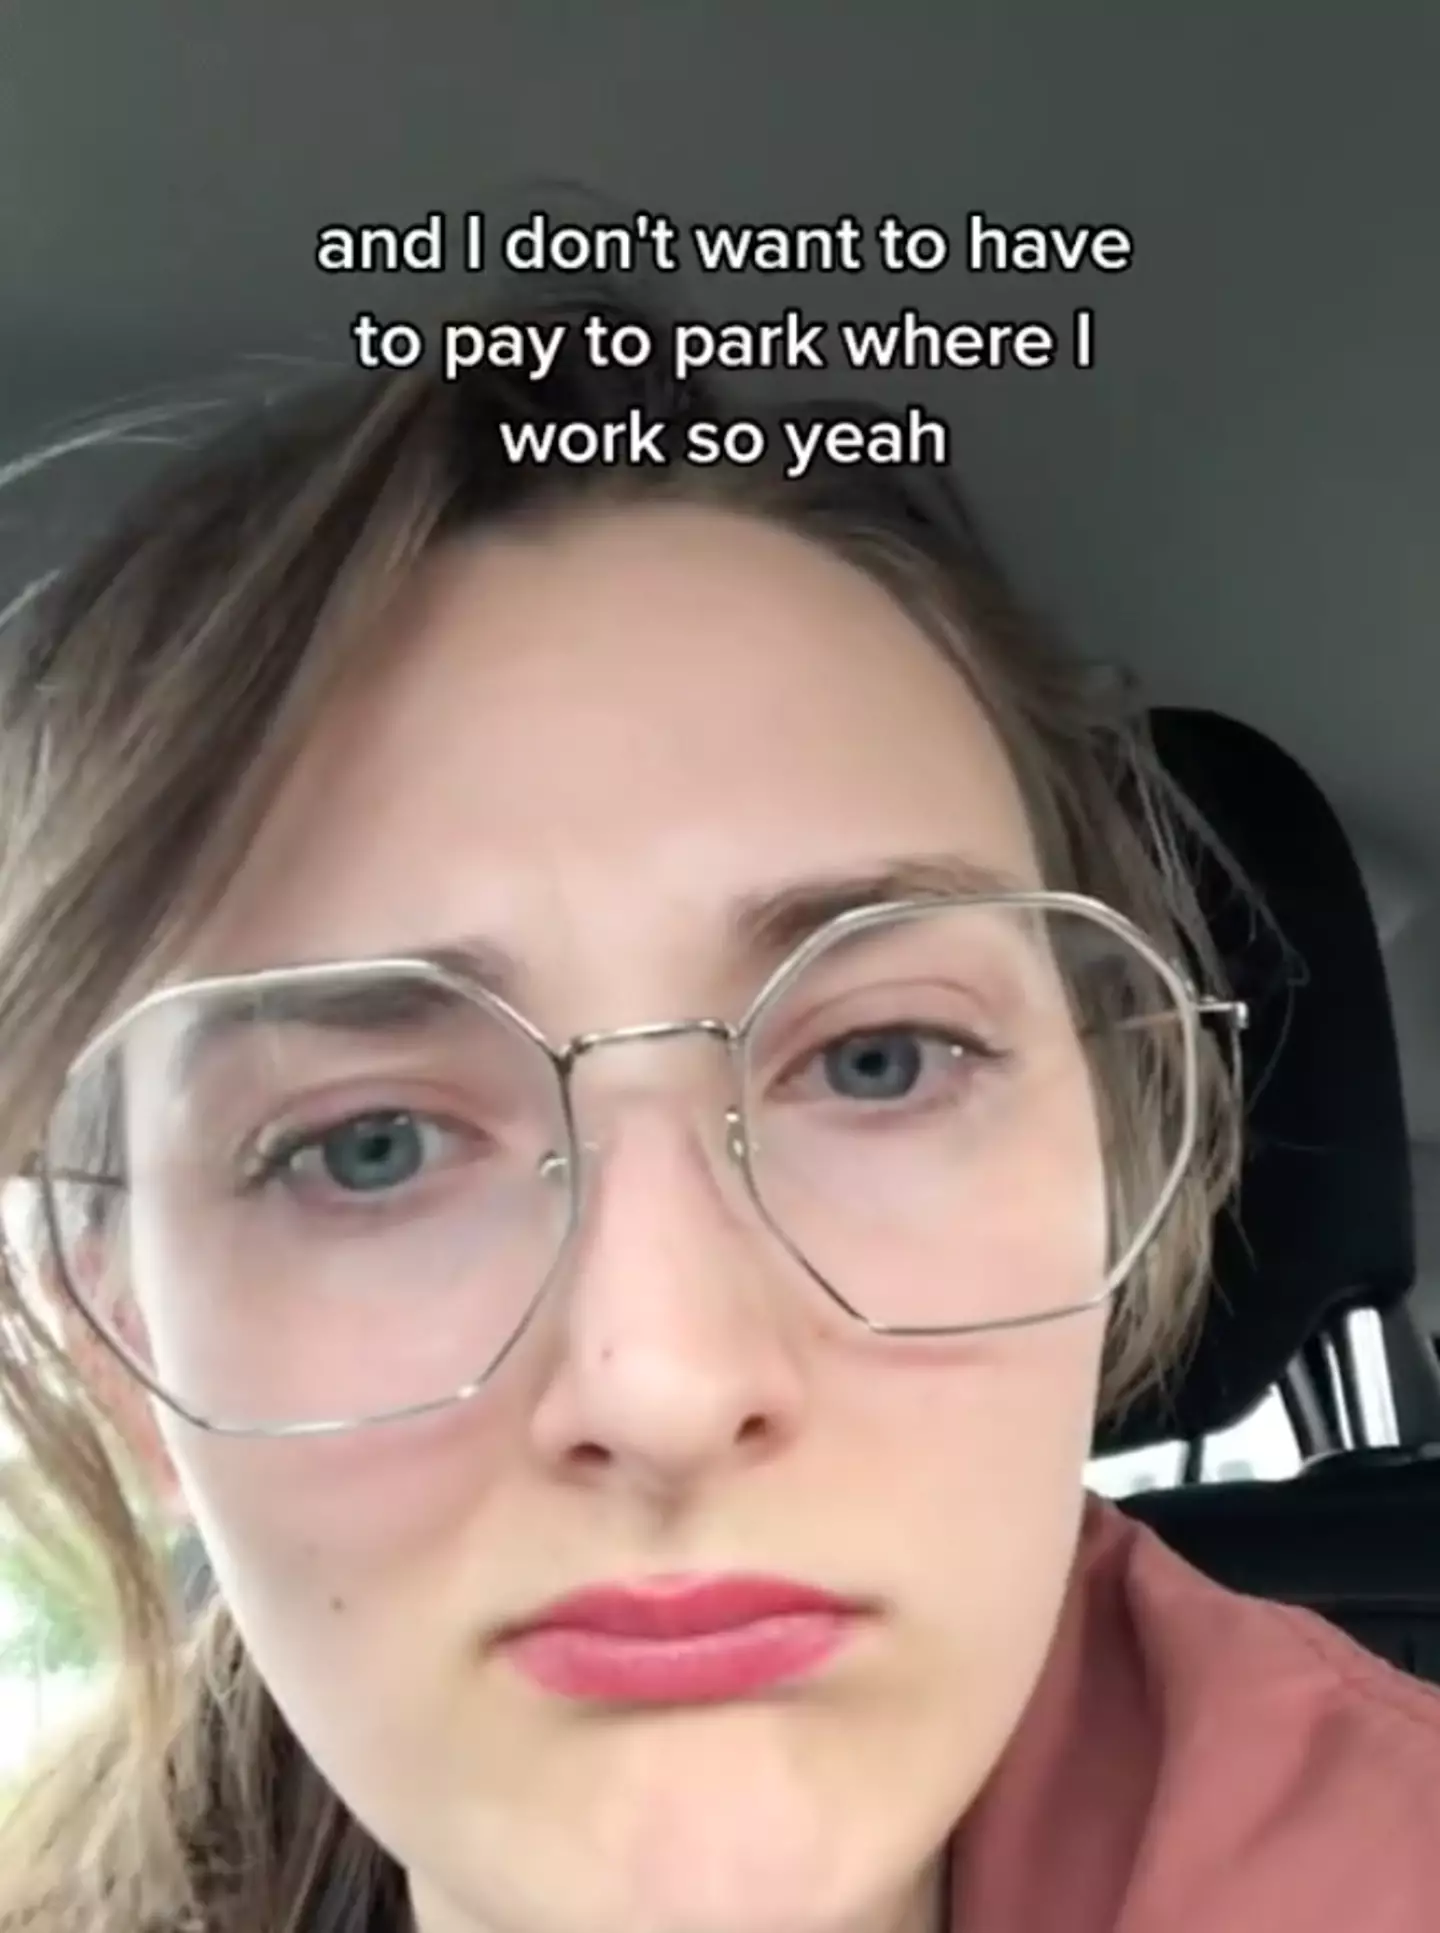 Indie also doesn't want to pay for parking at a job.